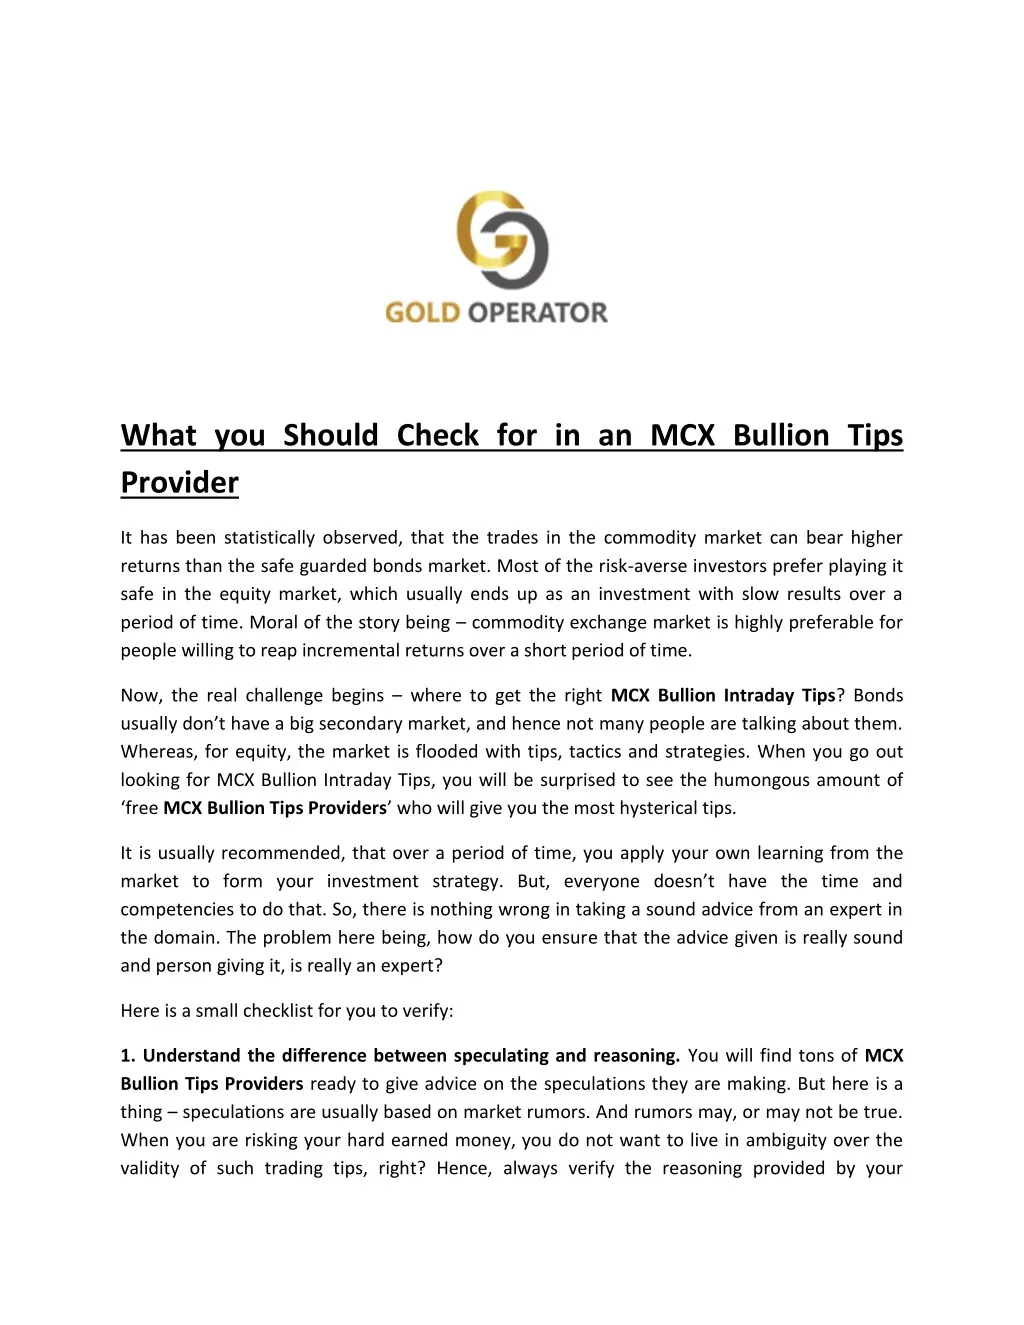 what you should check for in an mcx bullion tips